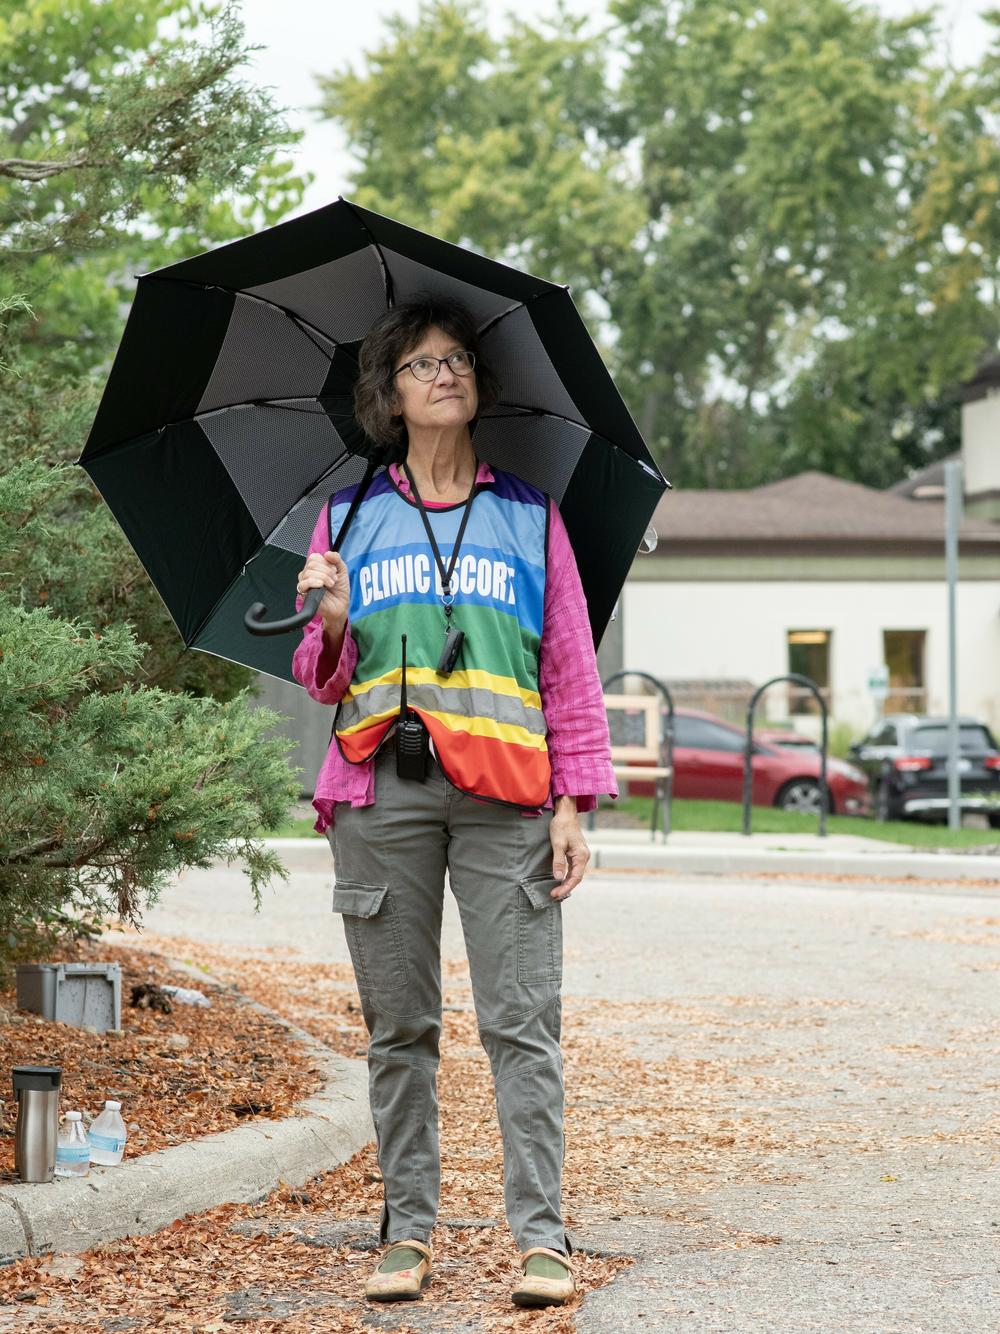 Michelle O'Grady is a patient escort at the Planned Parenthood clinic in Ann Arbor, Michigan. She uses her umbrella to shield patients from the view of any protestors as they walk into the clinic.